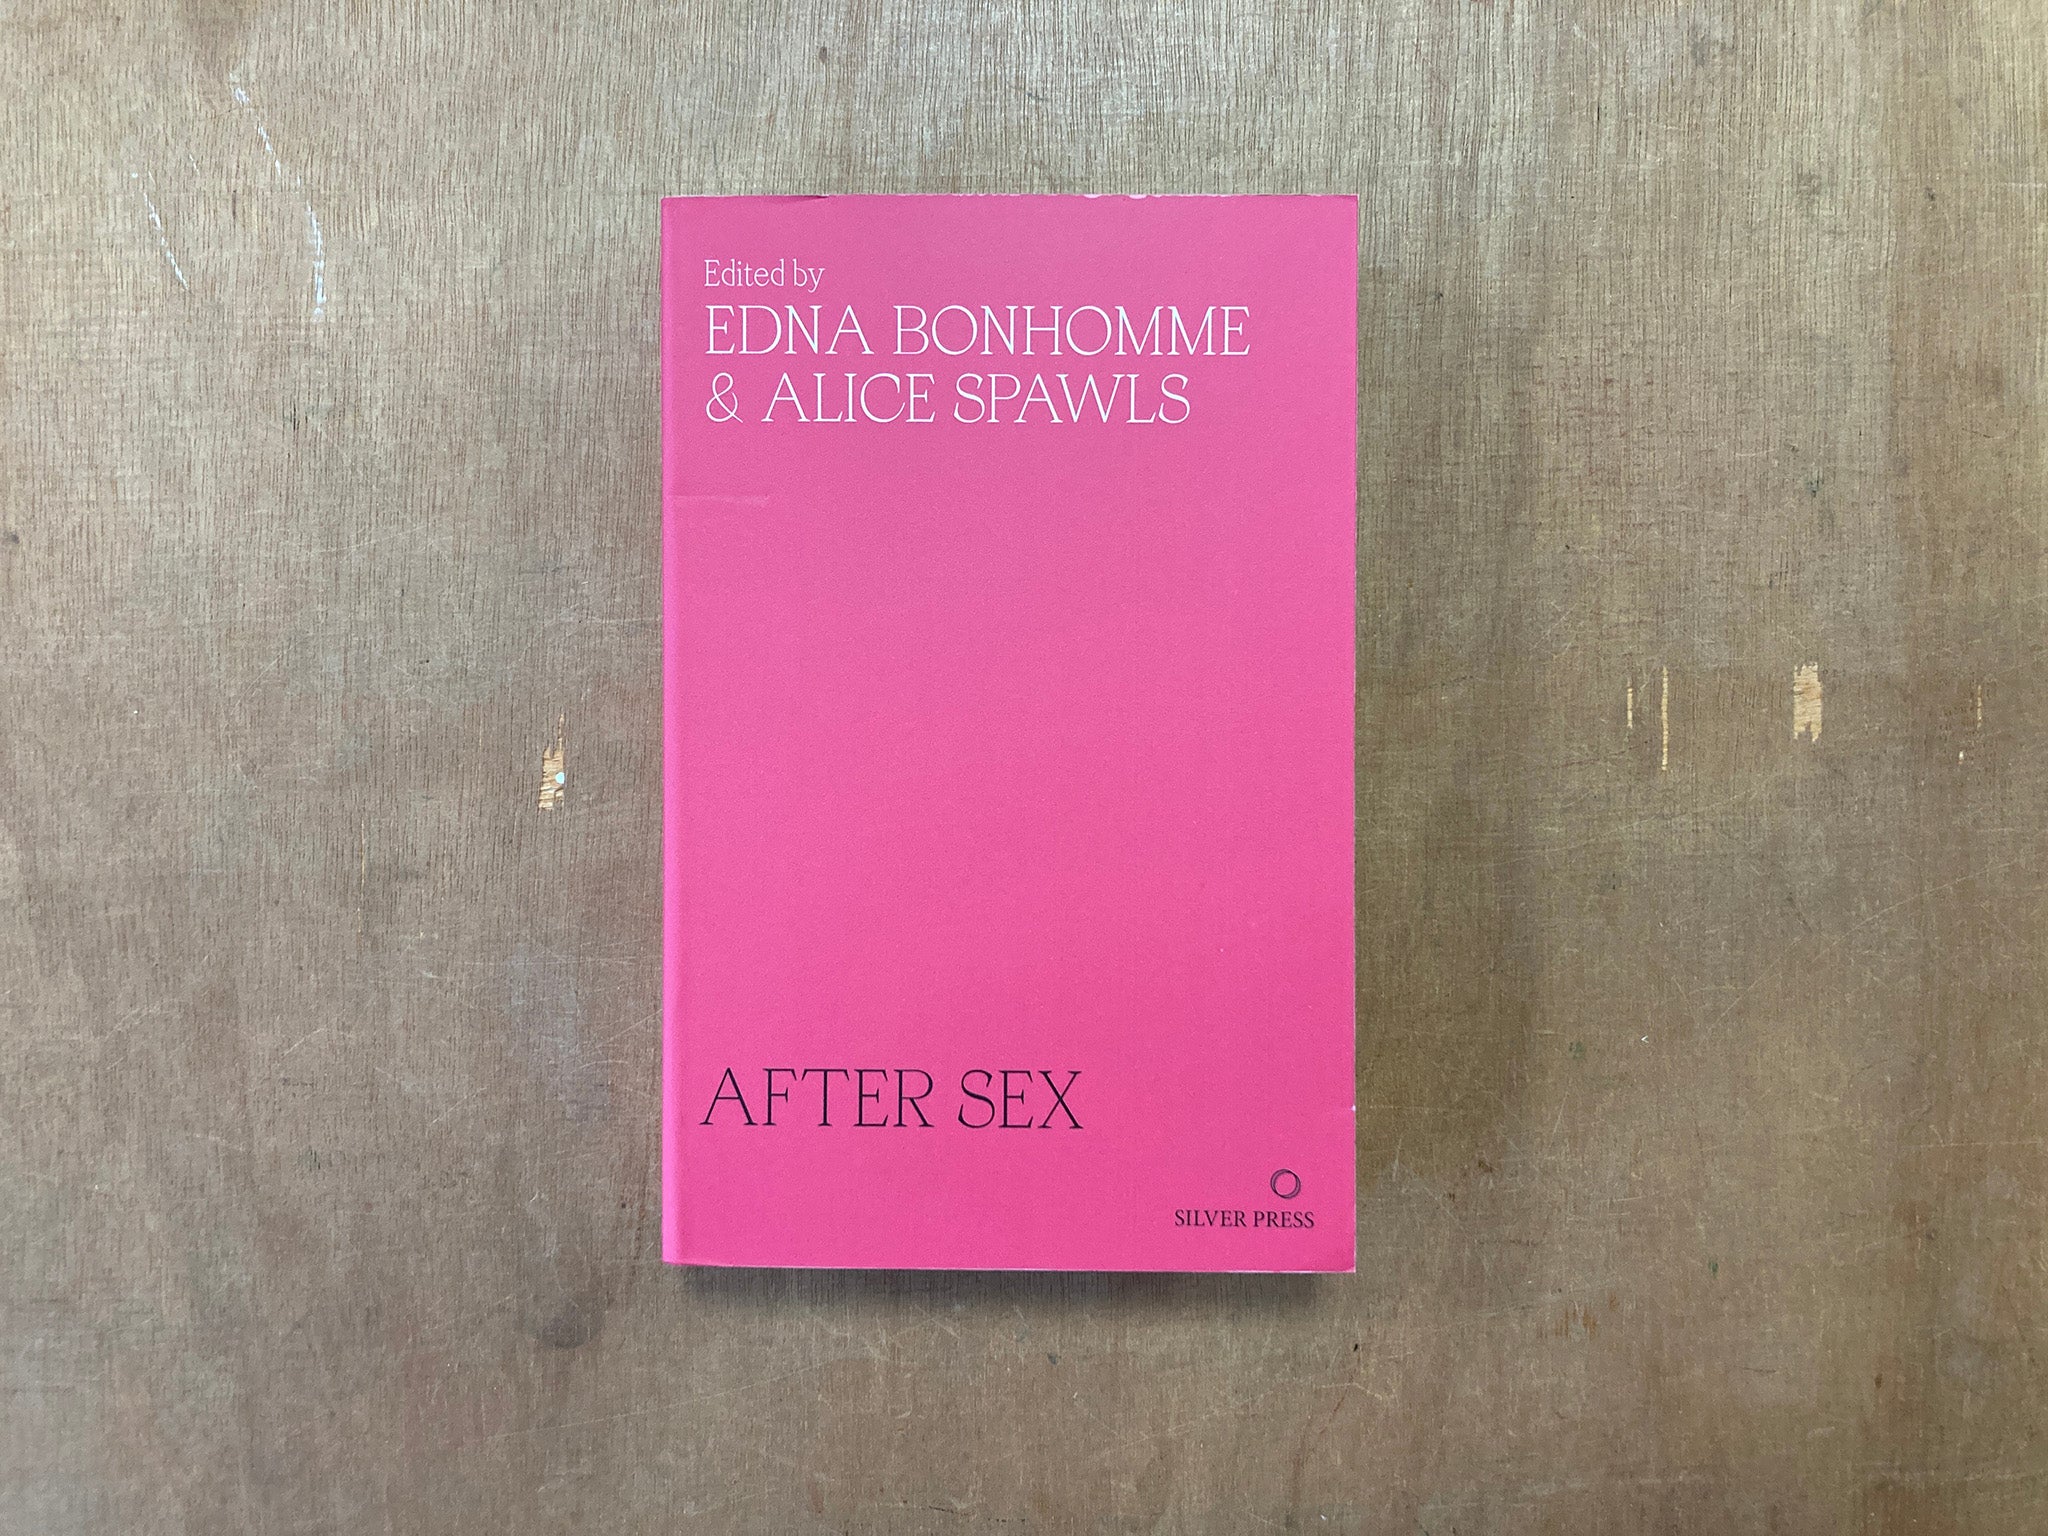 AFTER SEX edited by Edna Bonhomme and Alice Spawls